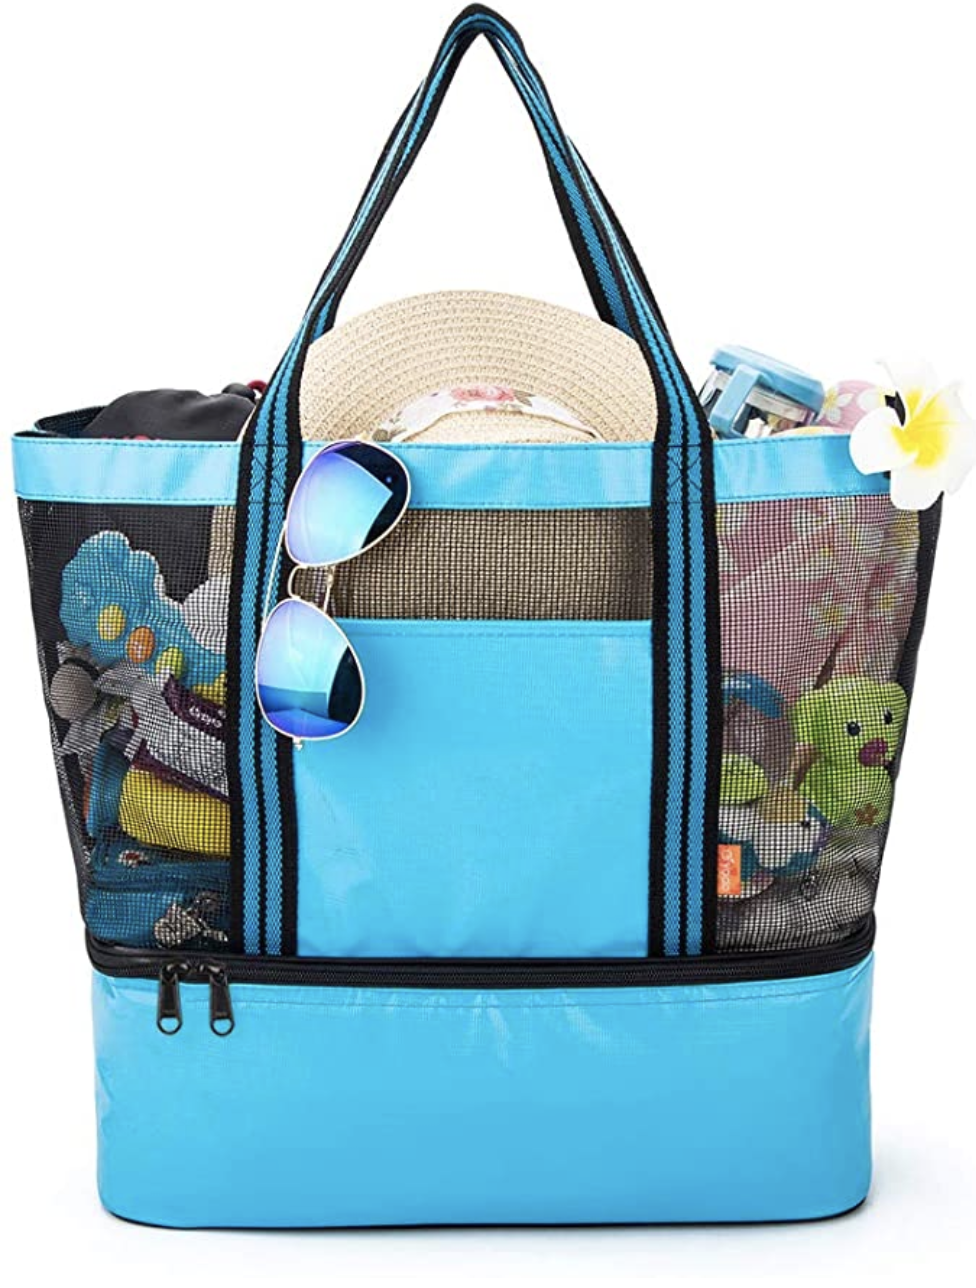 Yodo Beach Tote Bag with Insulated Cooler